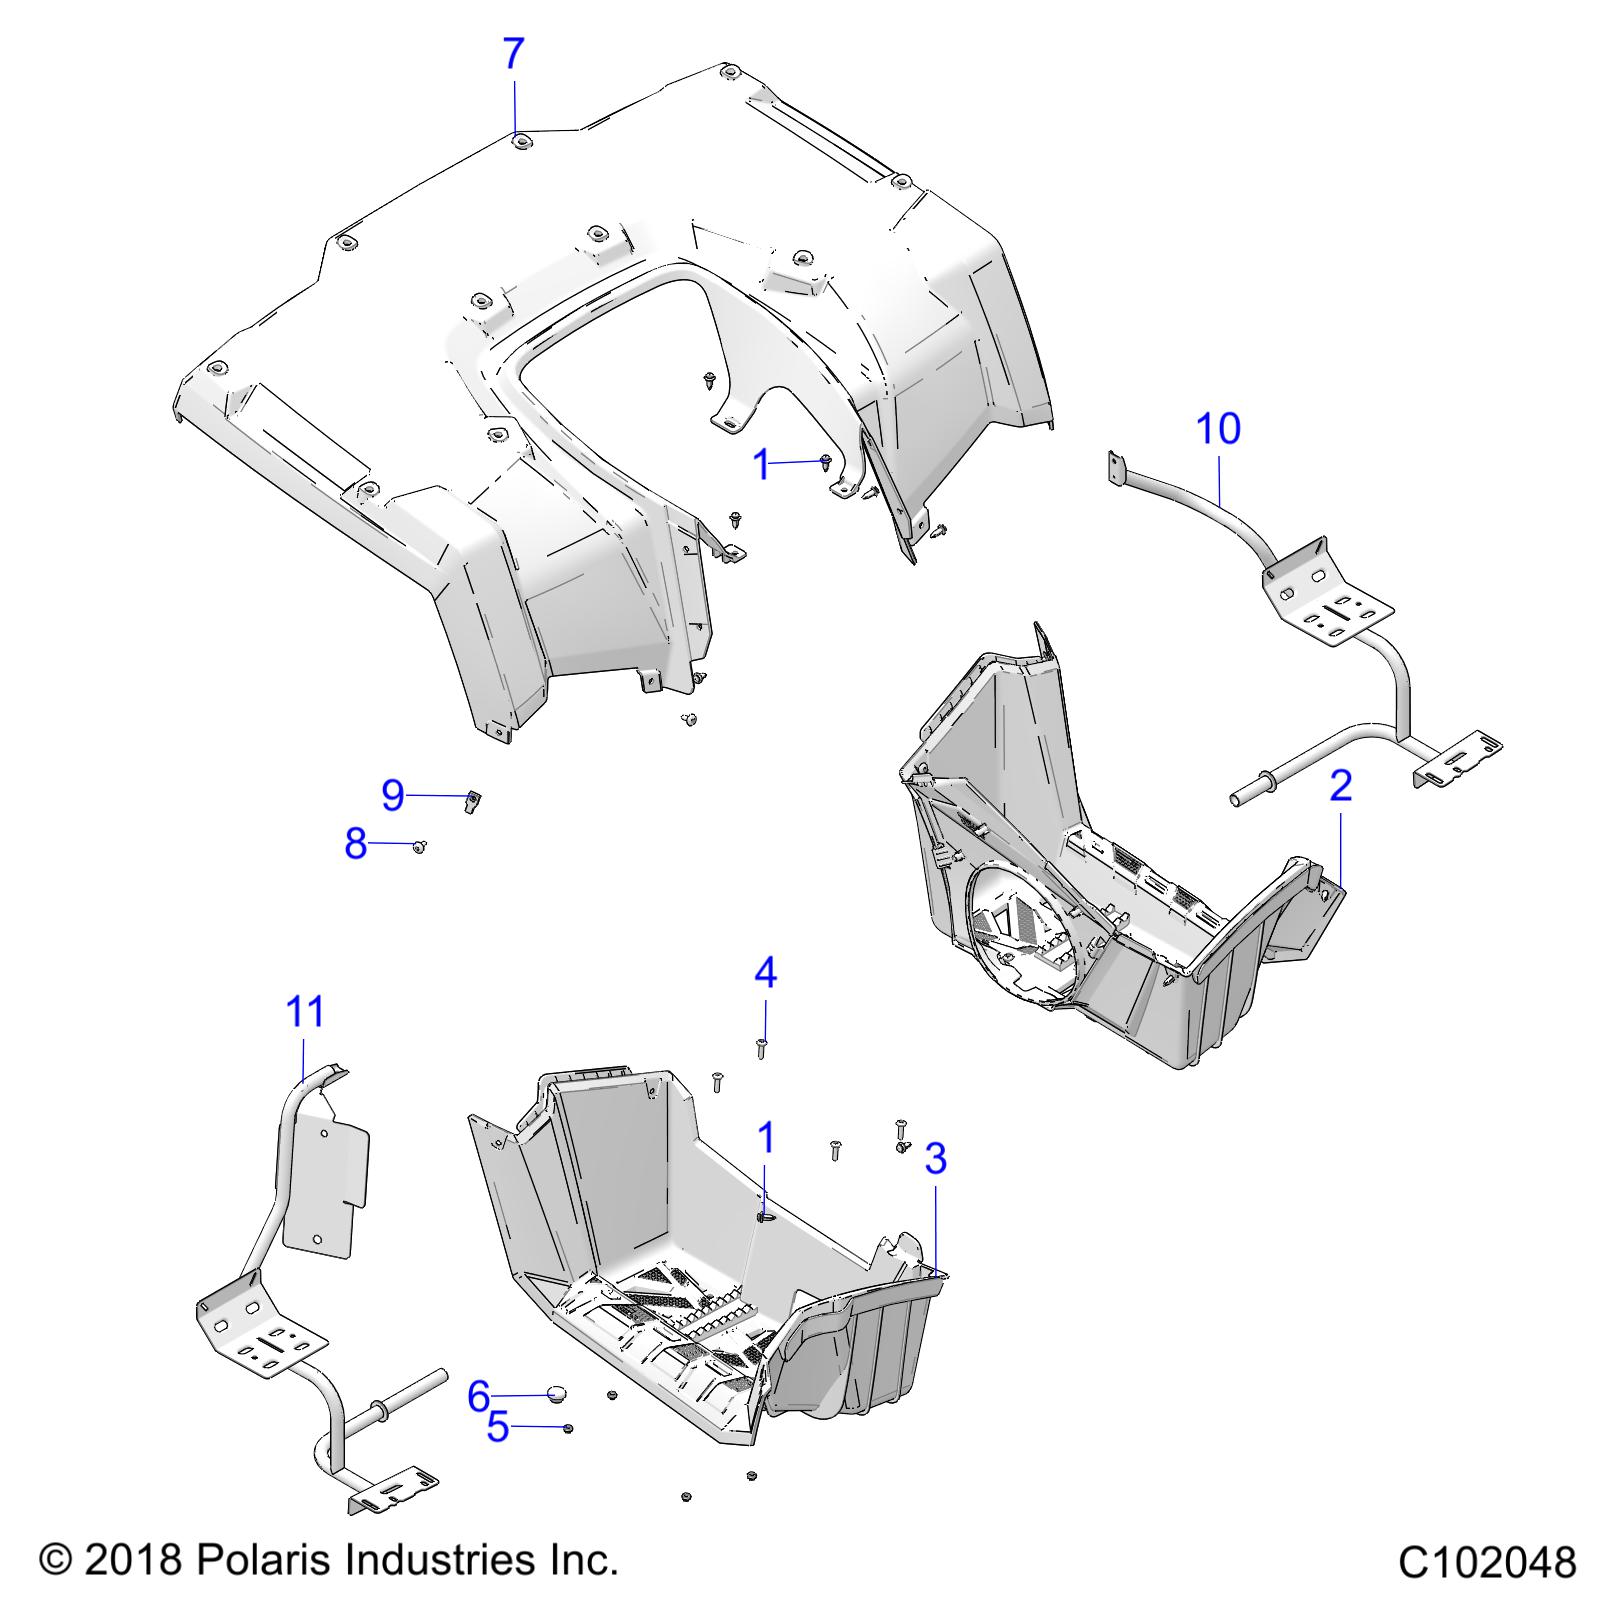 Part Number : 5450525-498 CAB  REAR  RIGHT  SPORTSMAN  S